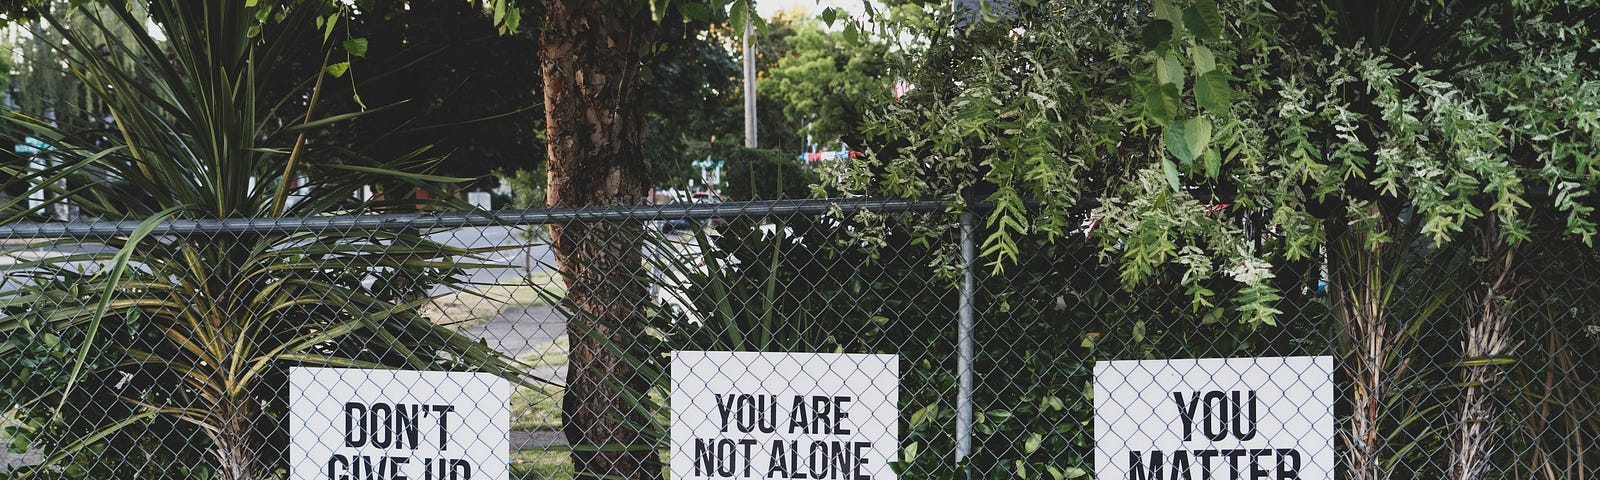 Signs reading don’t give up, you are not alone, and you matter